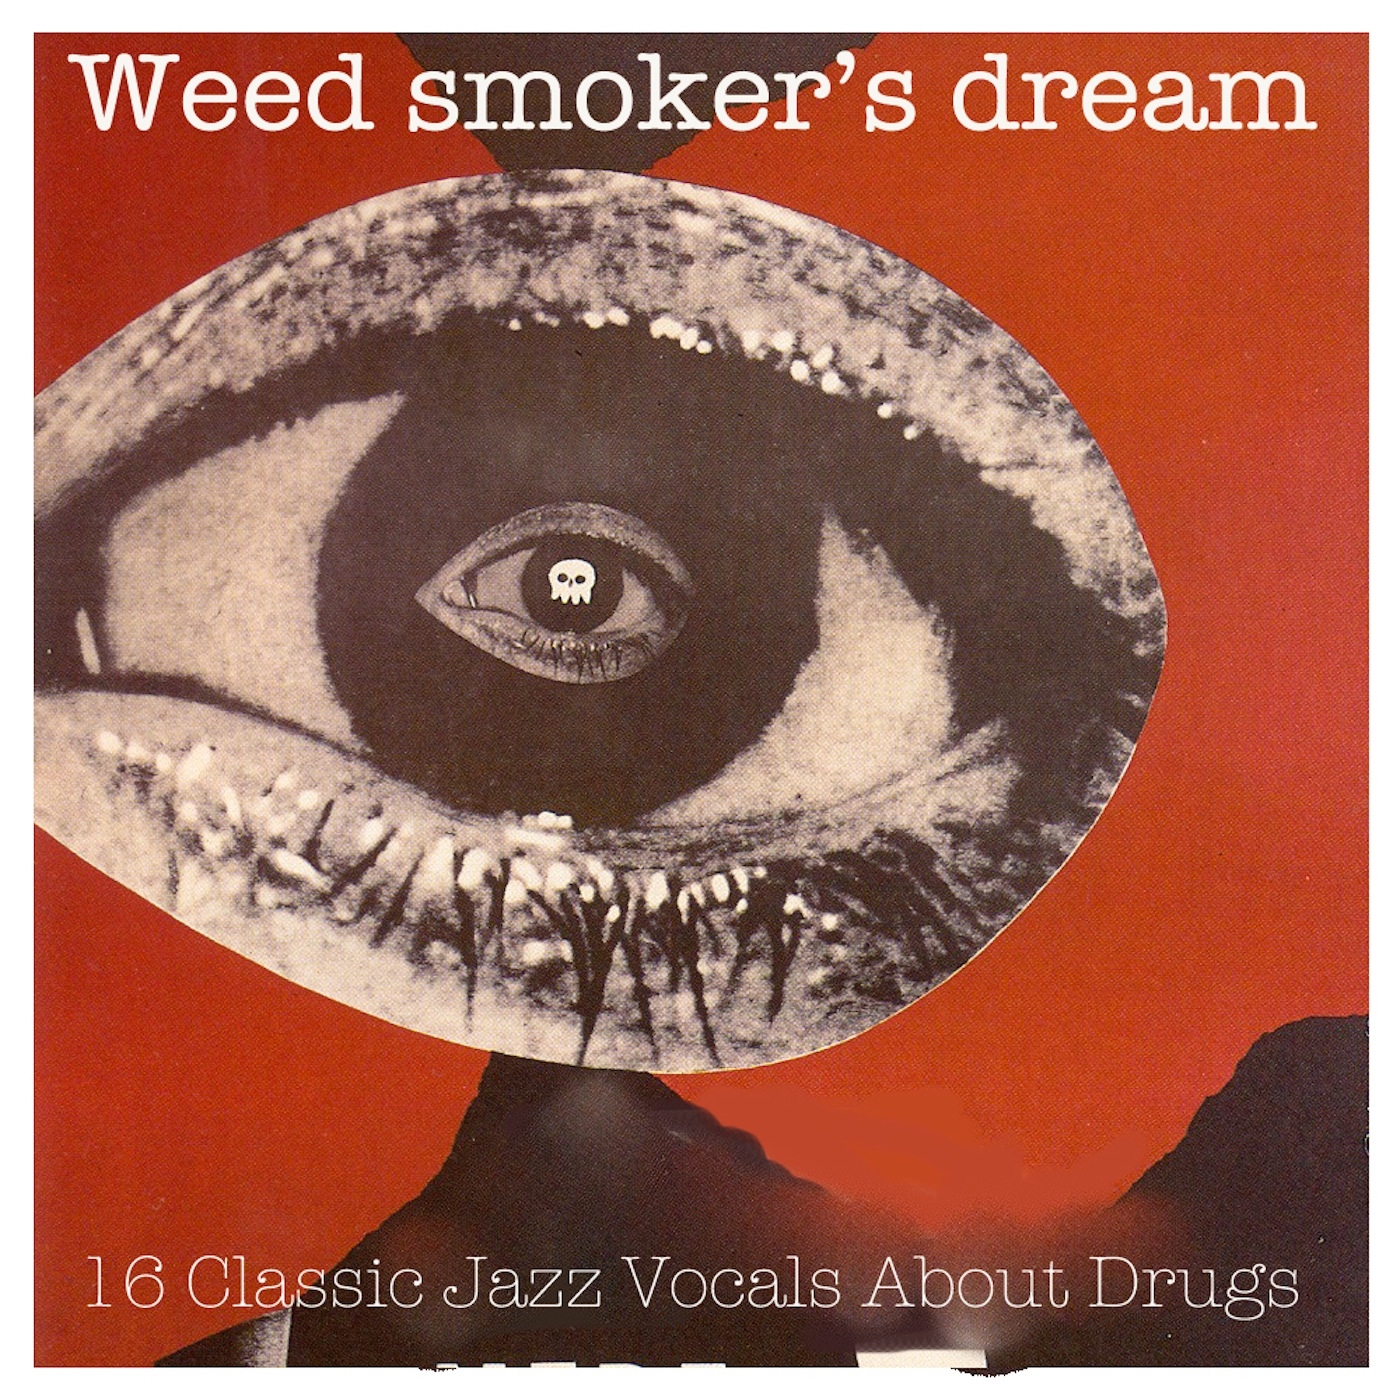 Weed Smoker's Dream: 16 Classic Jazz Vocals About Drugs (Remastered)